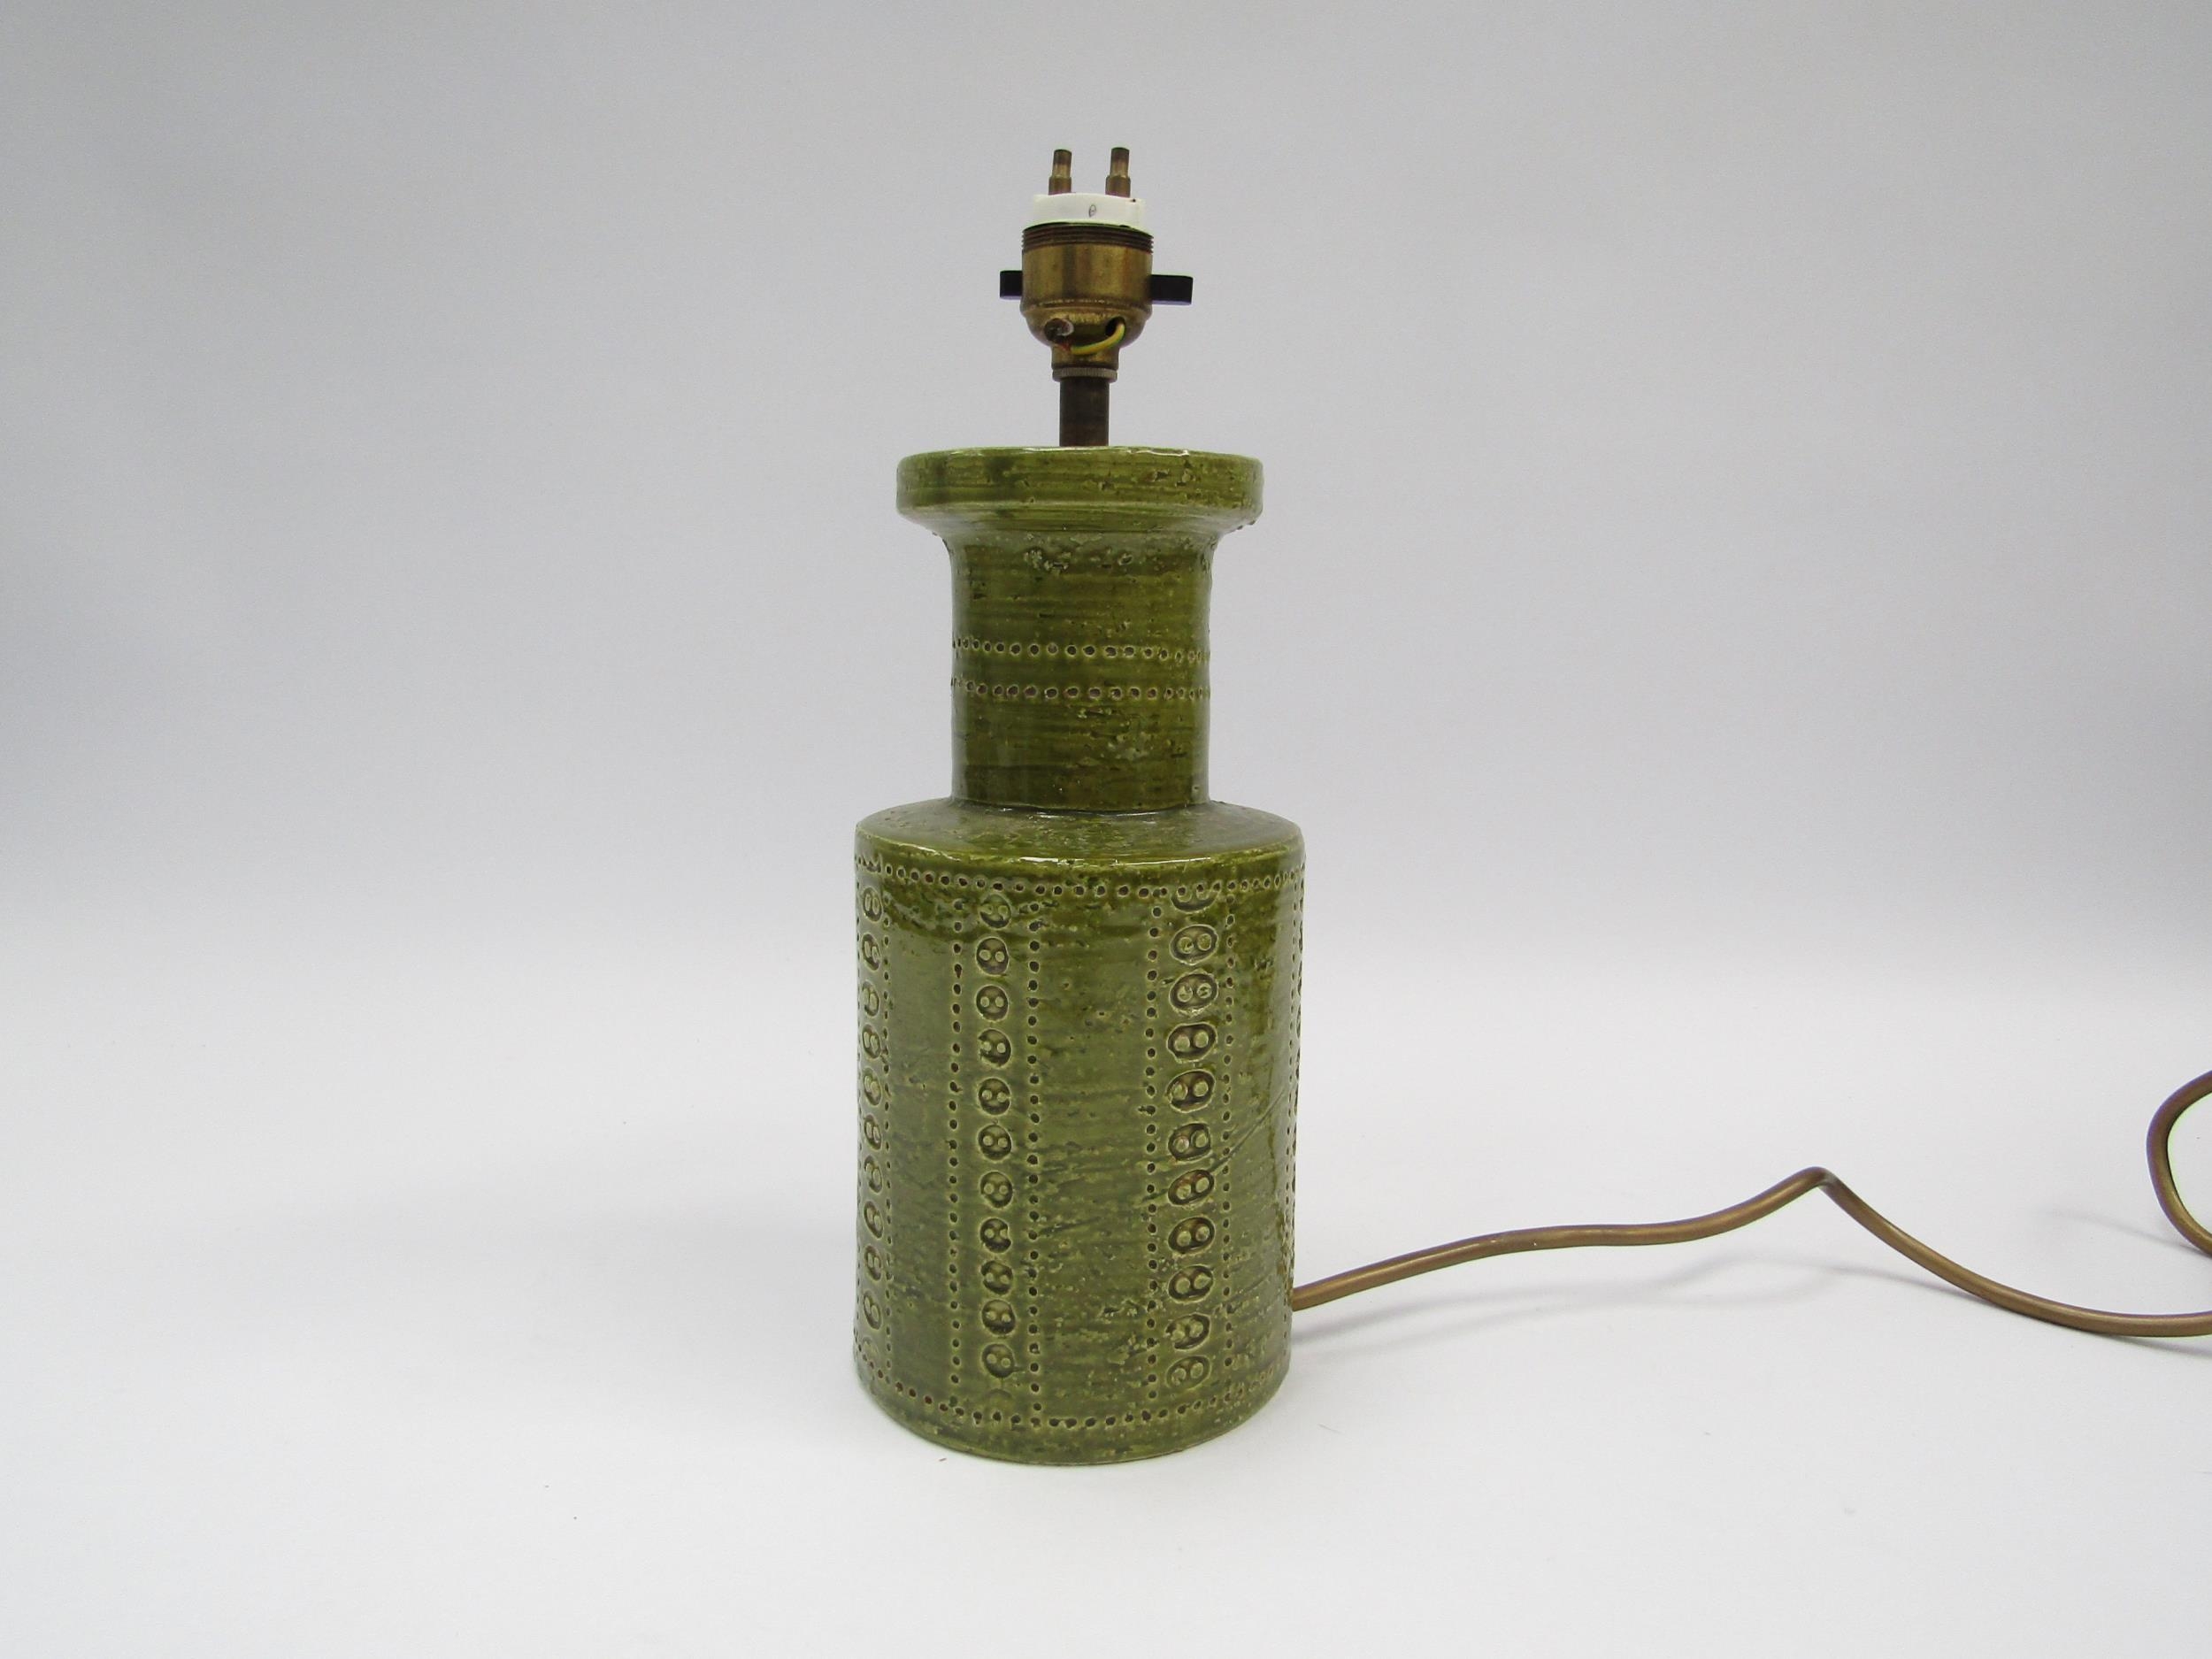 An Italian Bitossi lamp base with green glaze and impressed motif detail, 21.5cm high without